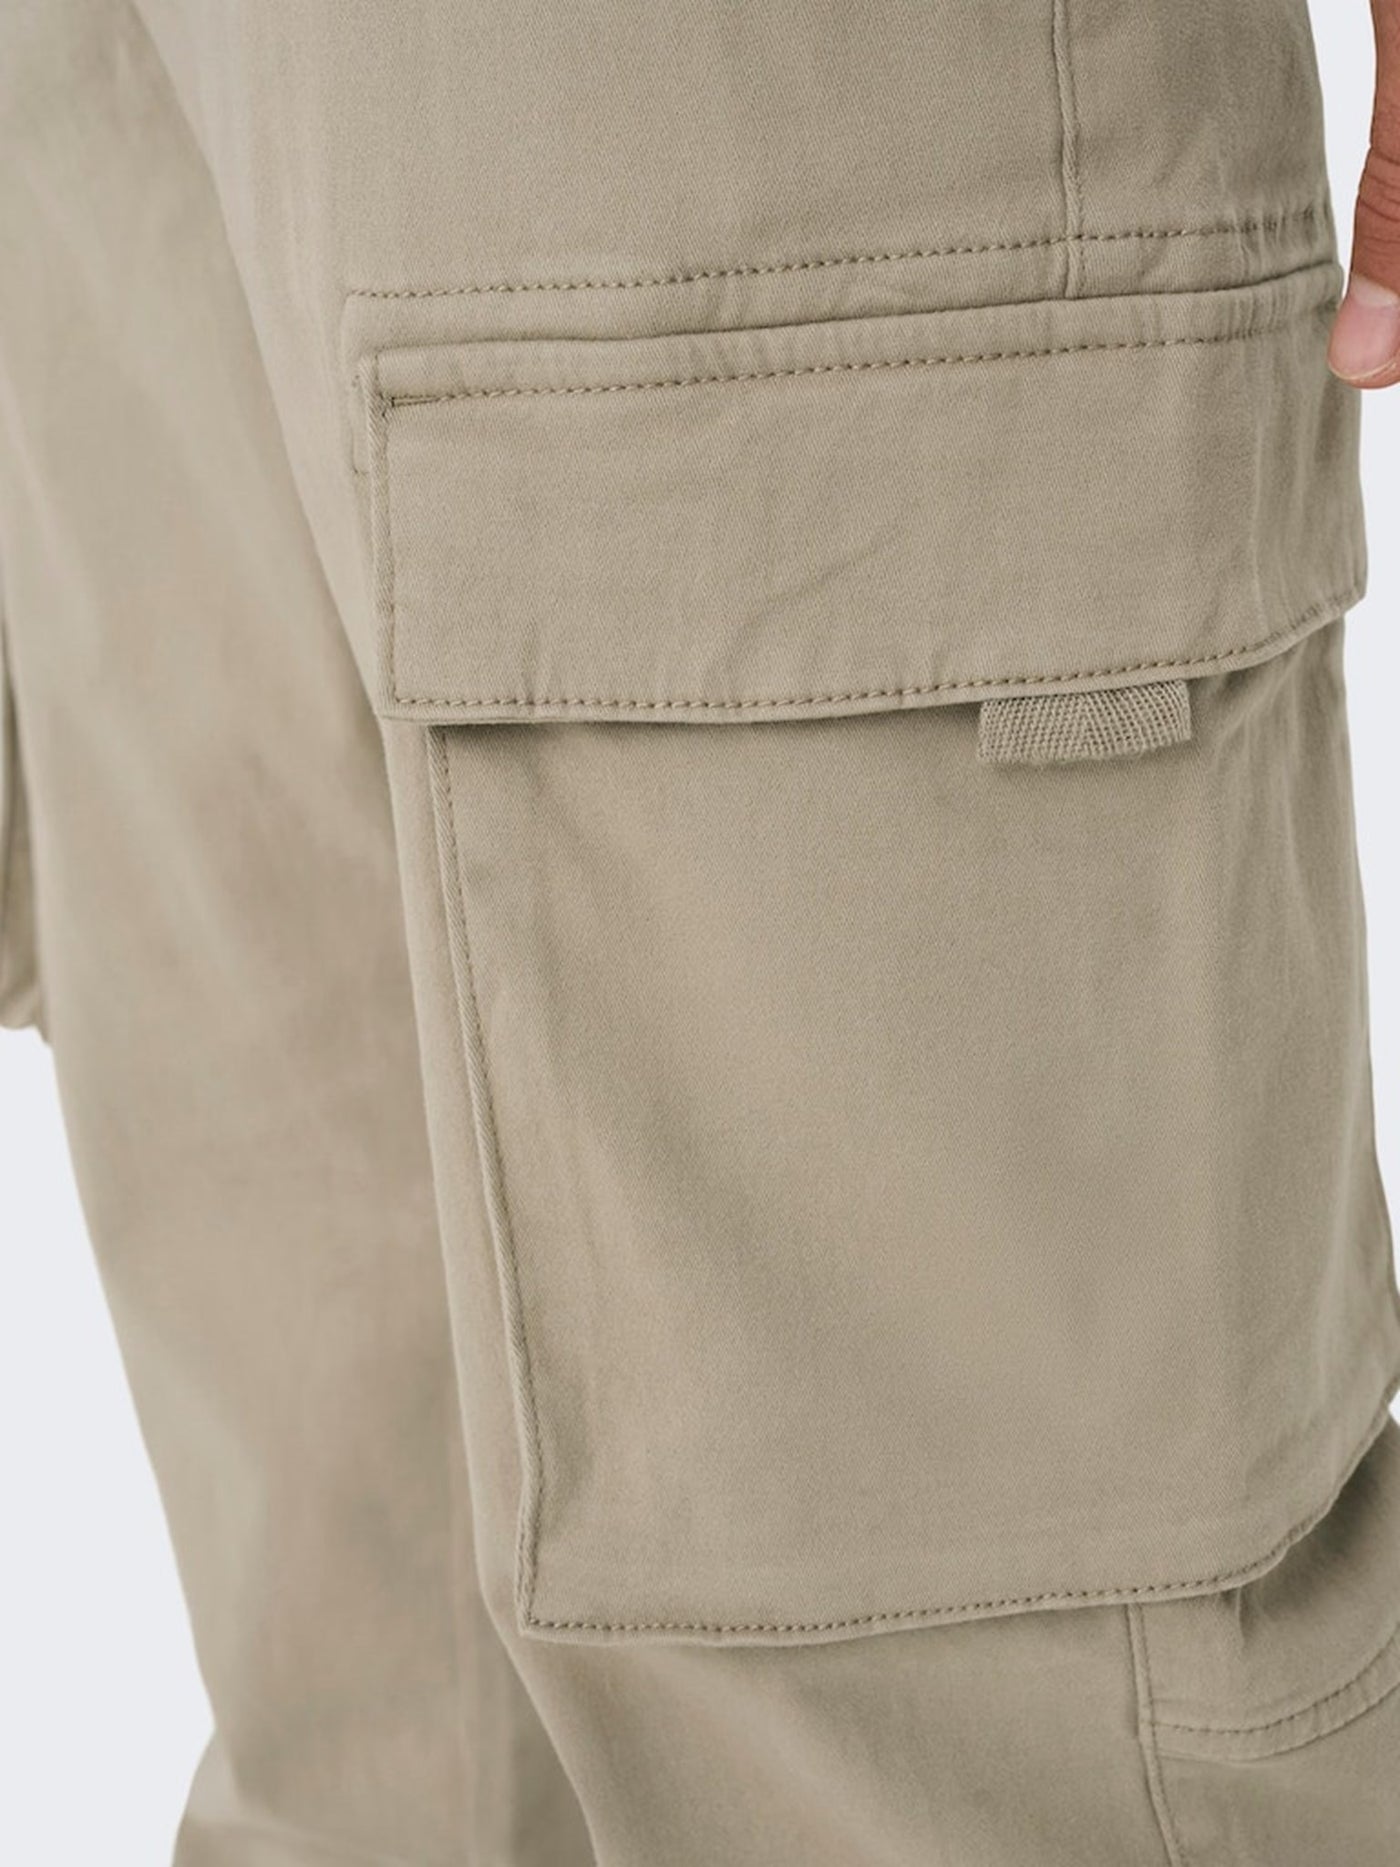 Next Cargo Pants - Chinchilla - Only & Sons - Sand/Beige 3